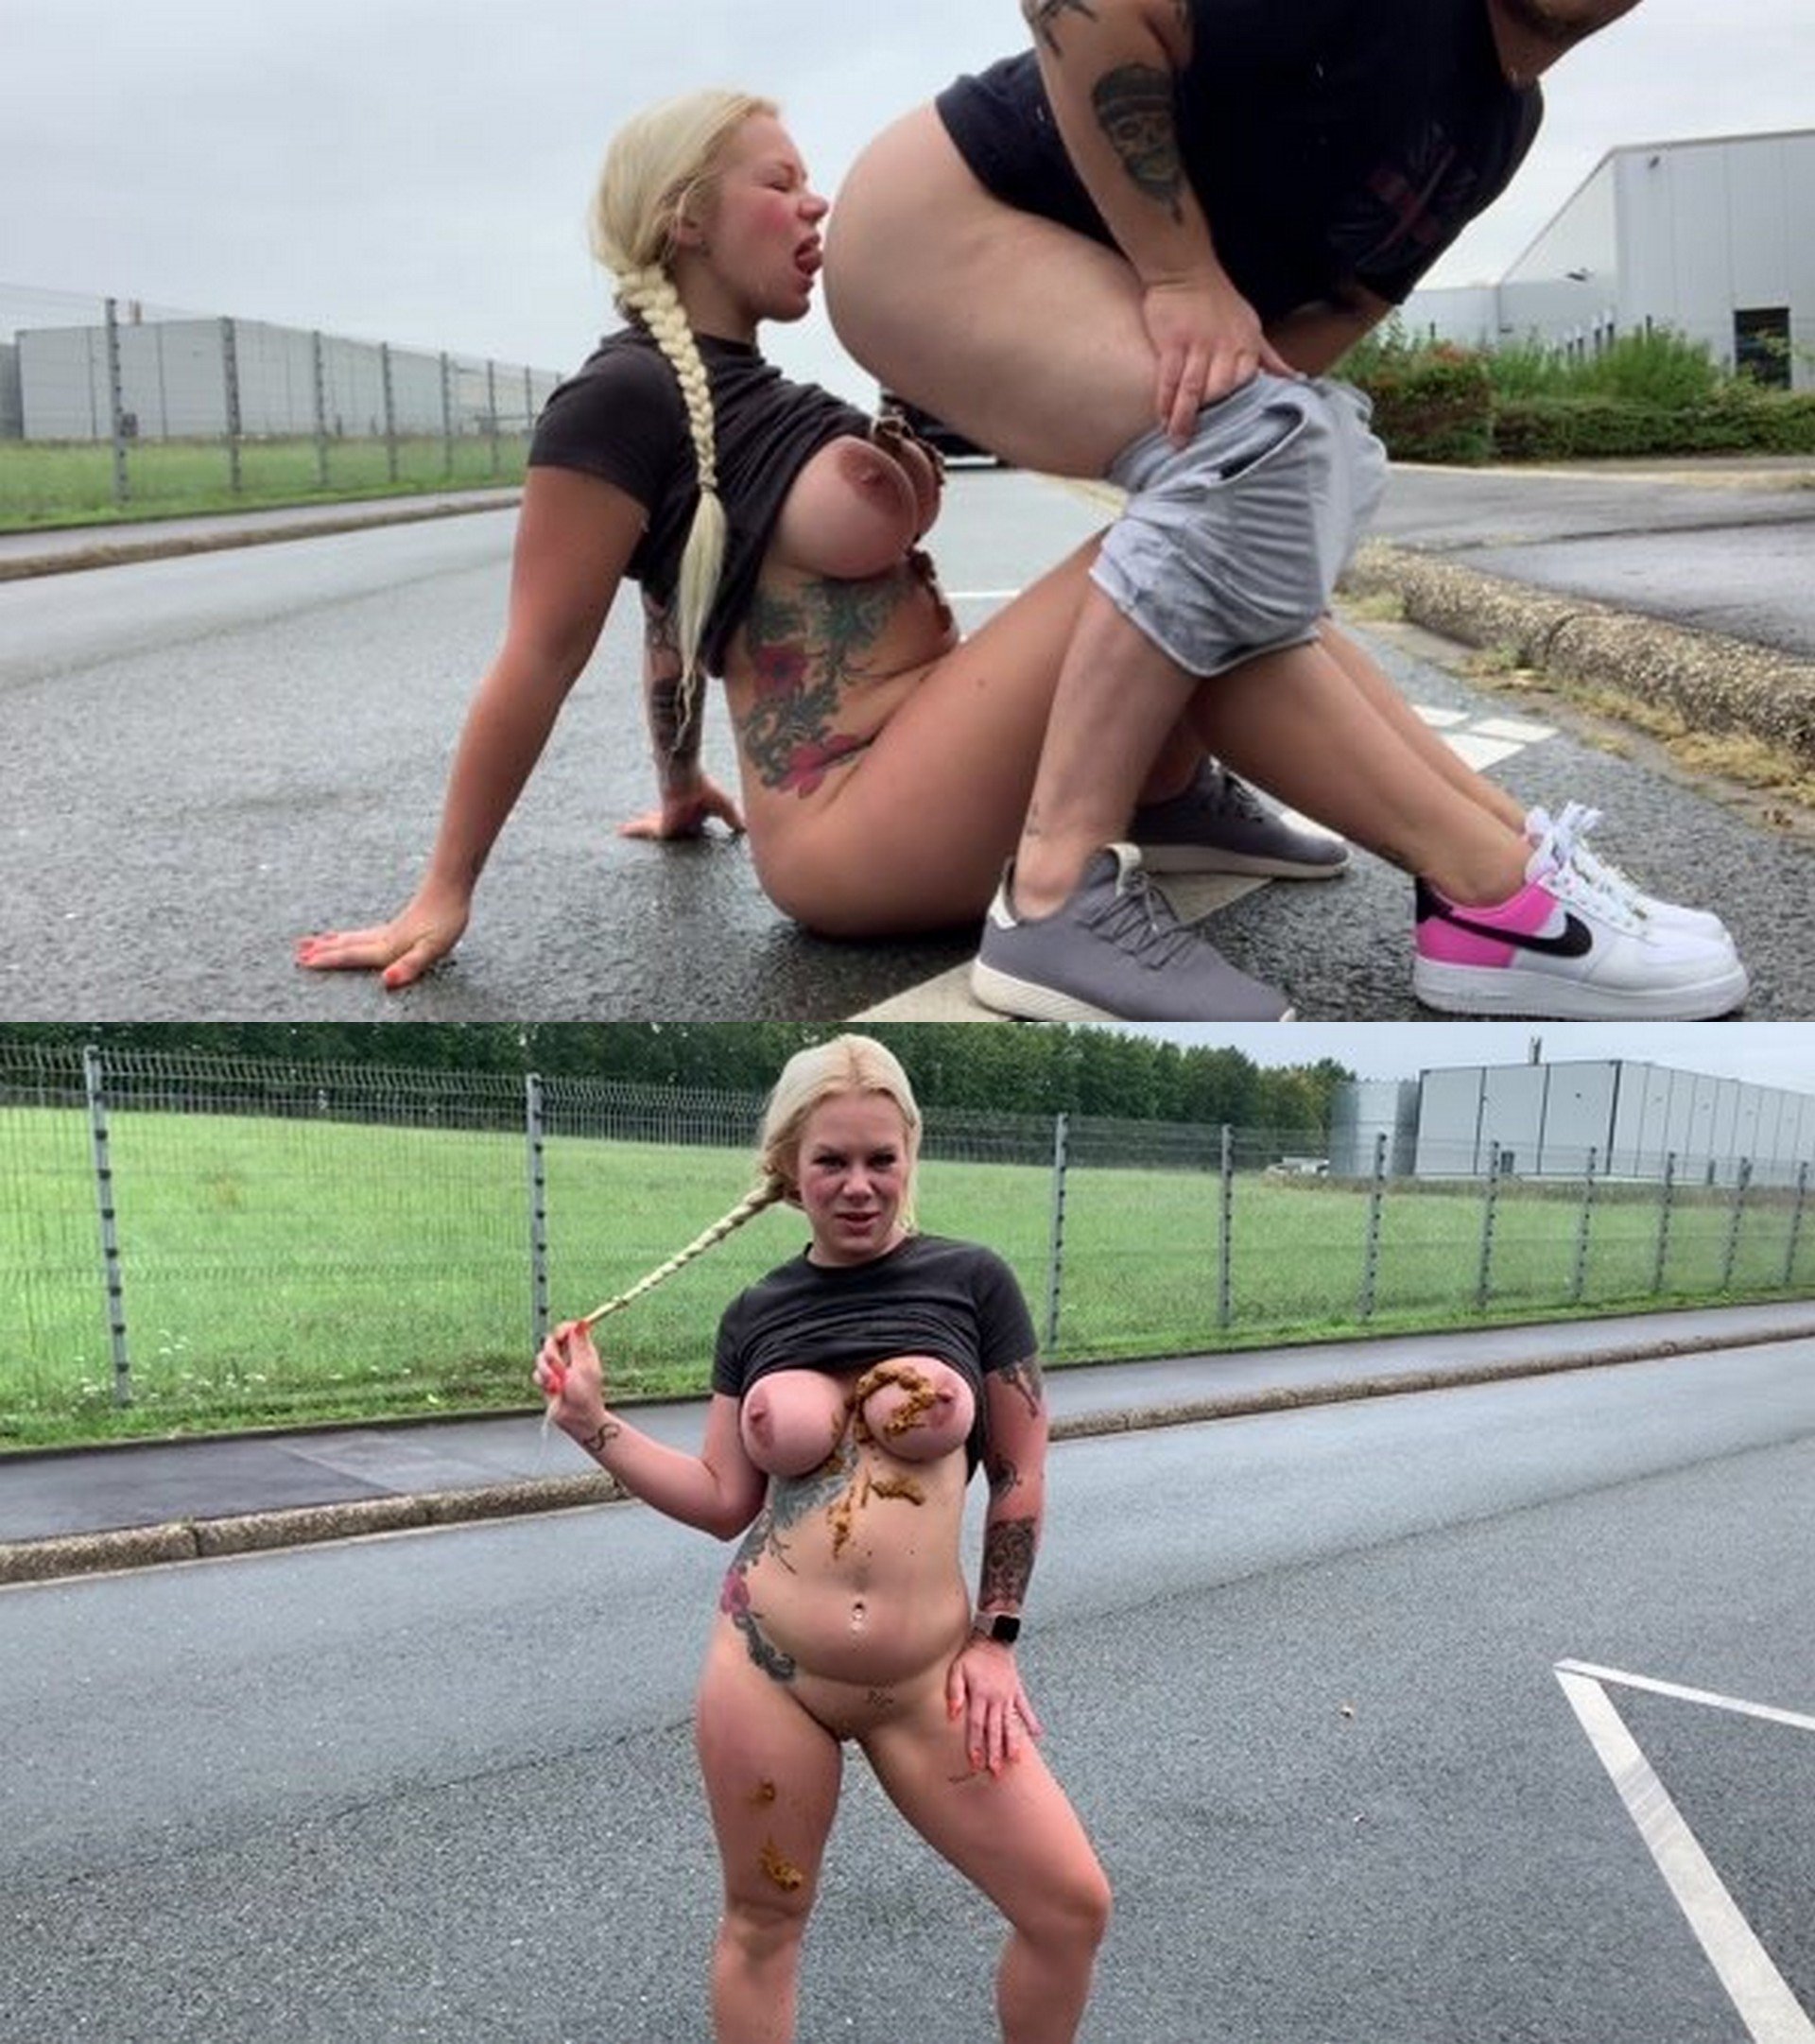 Hungry for sports – please shit me really full – Public on the roadside starring in video Devil Sophie ($24.99 ScatShop)